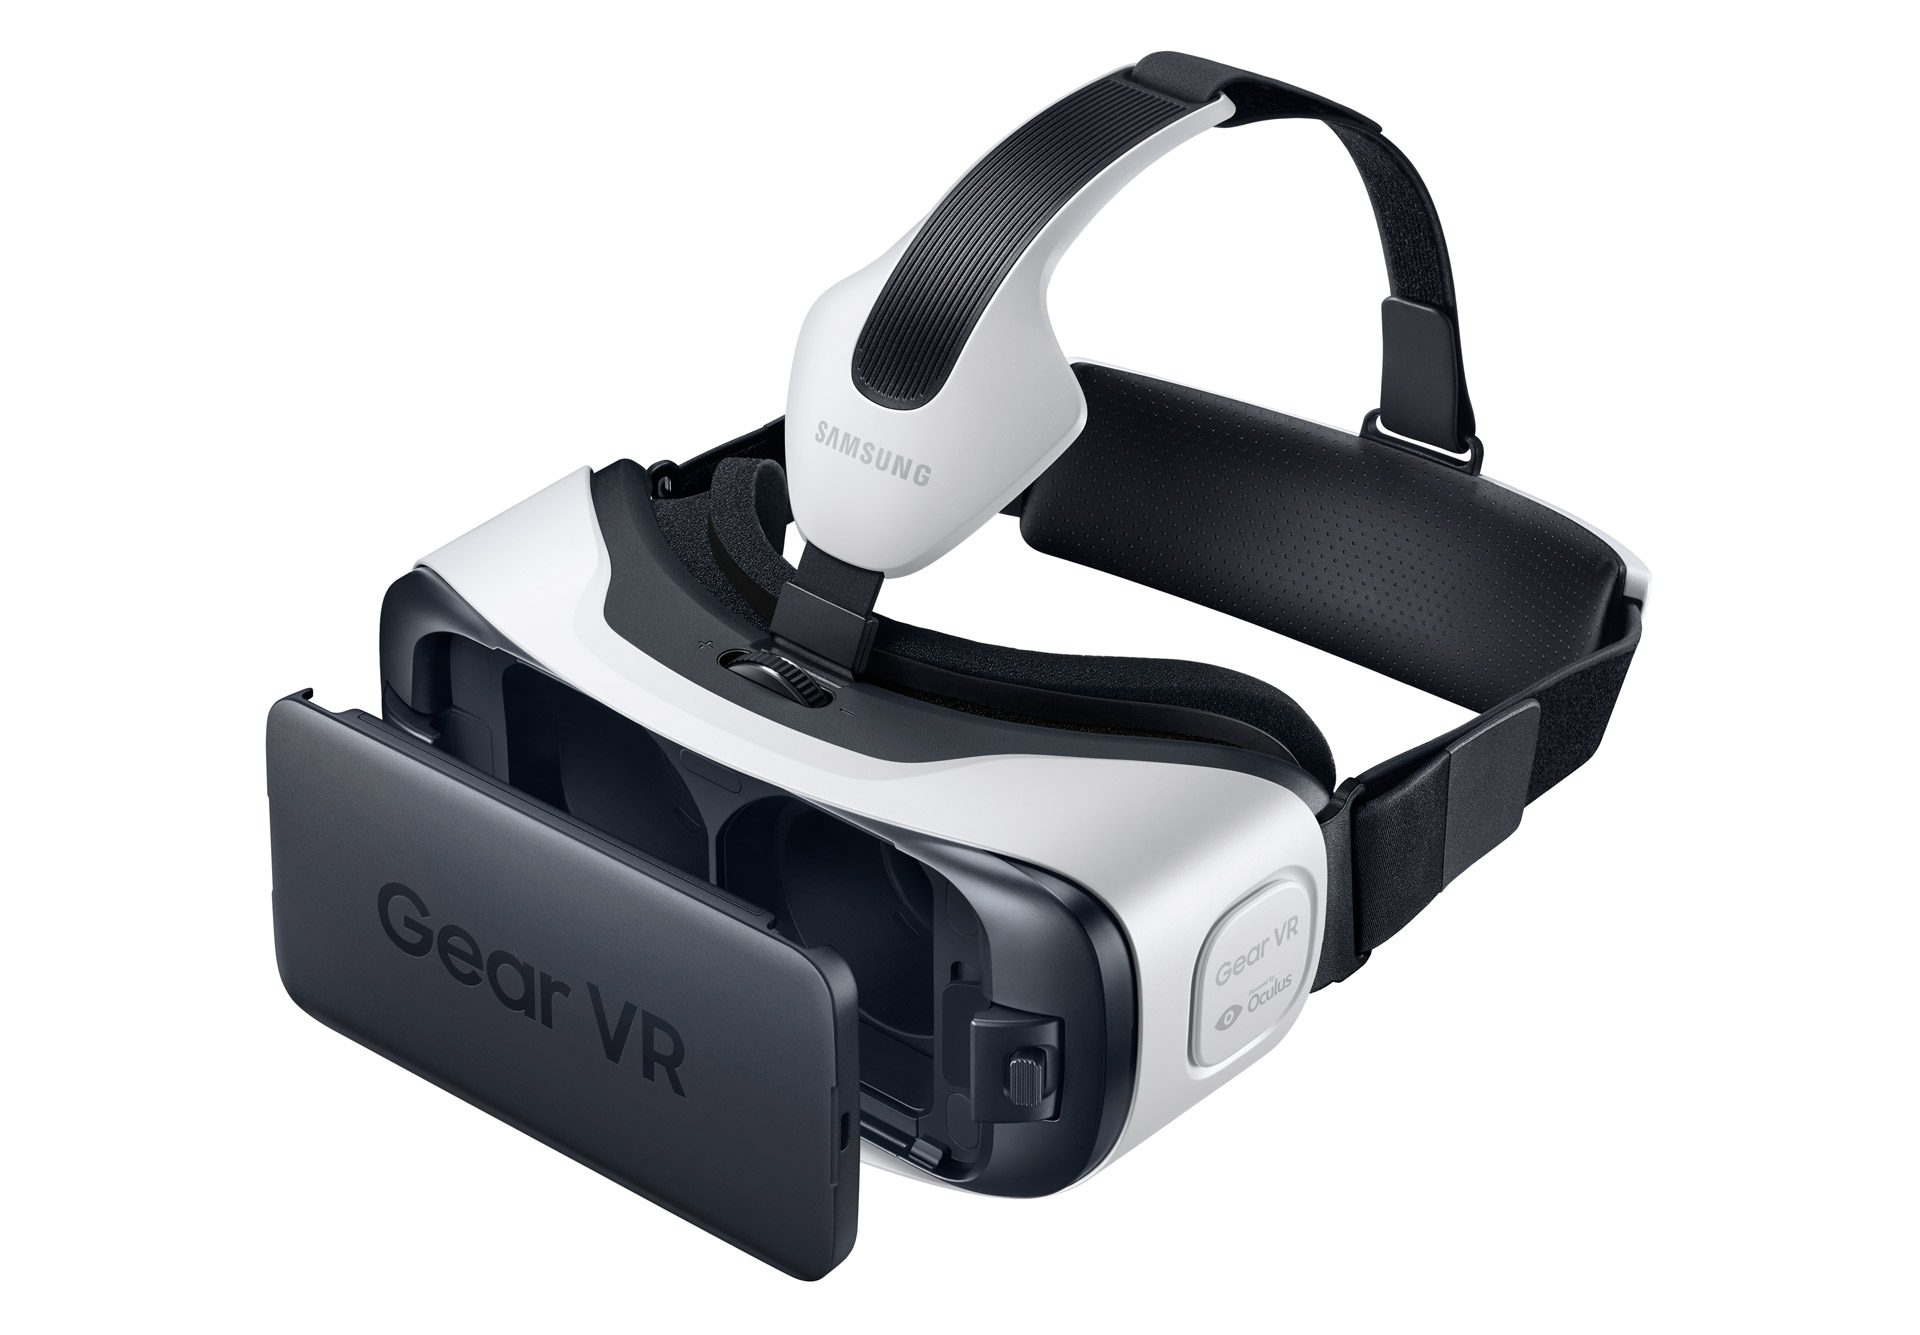 New Gear VR for Galaxy S6 and S6 Edge Goes on Sale May 8th U.S, Pre-orders Start Tomorrow – Road to VR